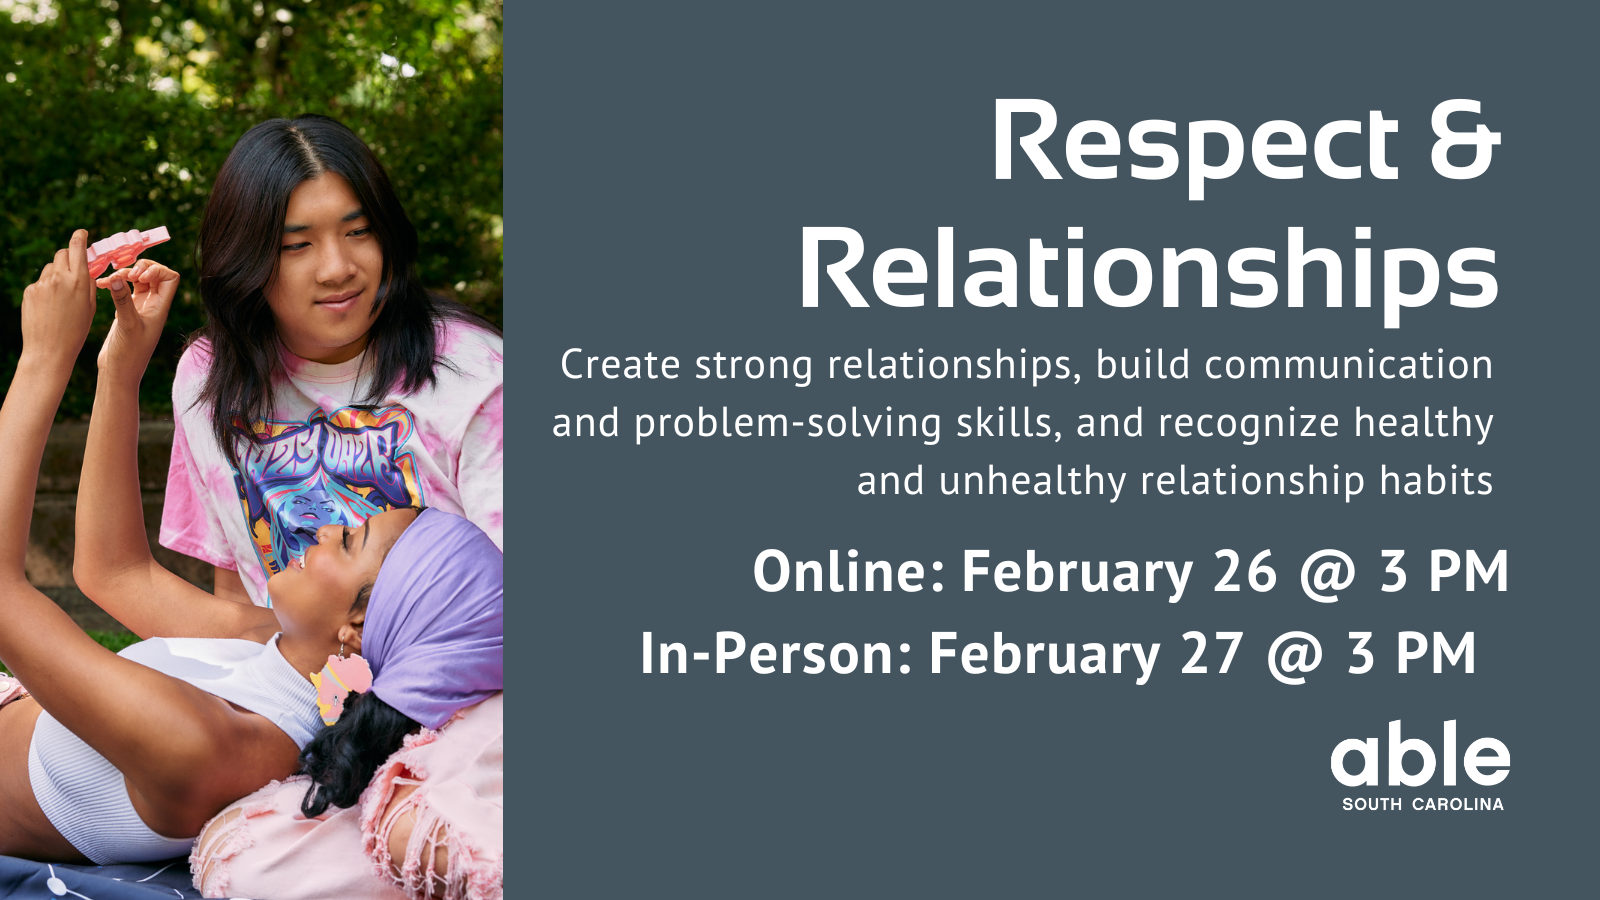 Text, 'Respect & Relationships. Create strong relationships, build communication and problem-solving skills, and recognize healthy and unhealthy relationship habits. Online Feb. 26, In-person Feb. 27 @ 3 pm.' Photo of an Autistic couple lounging outside.